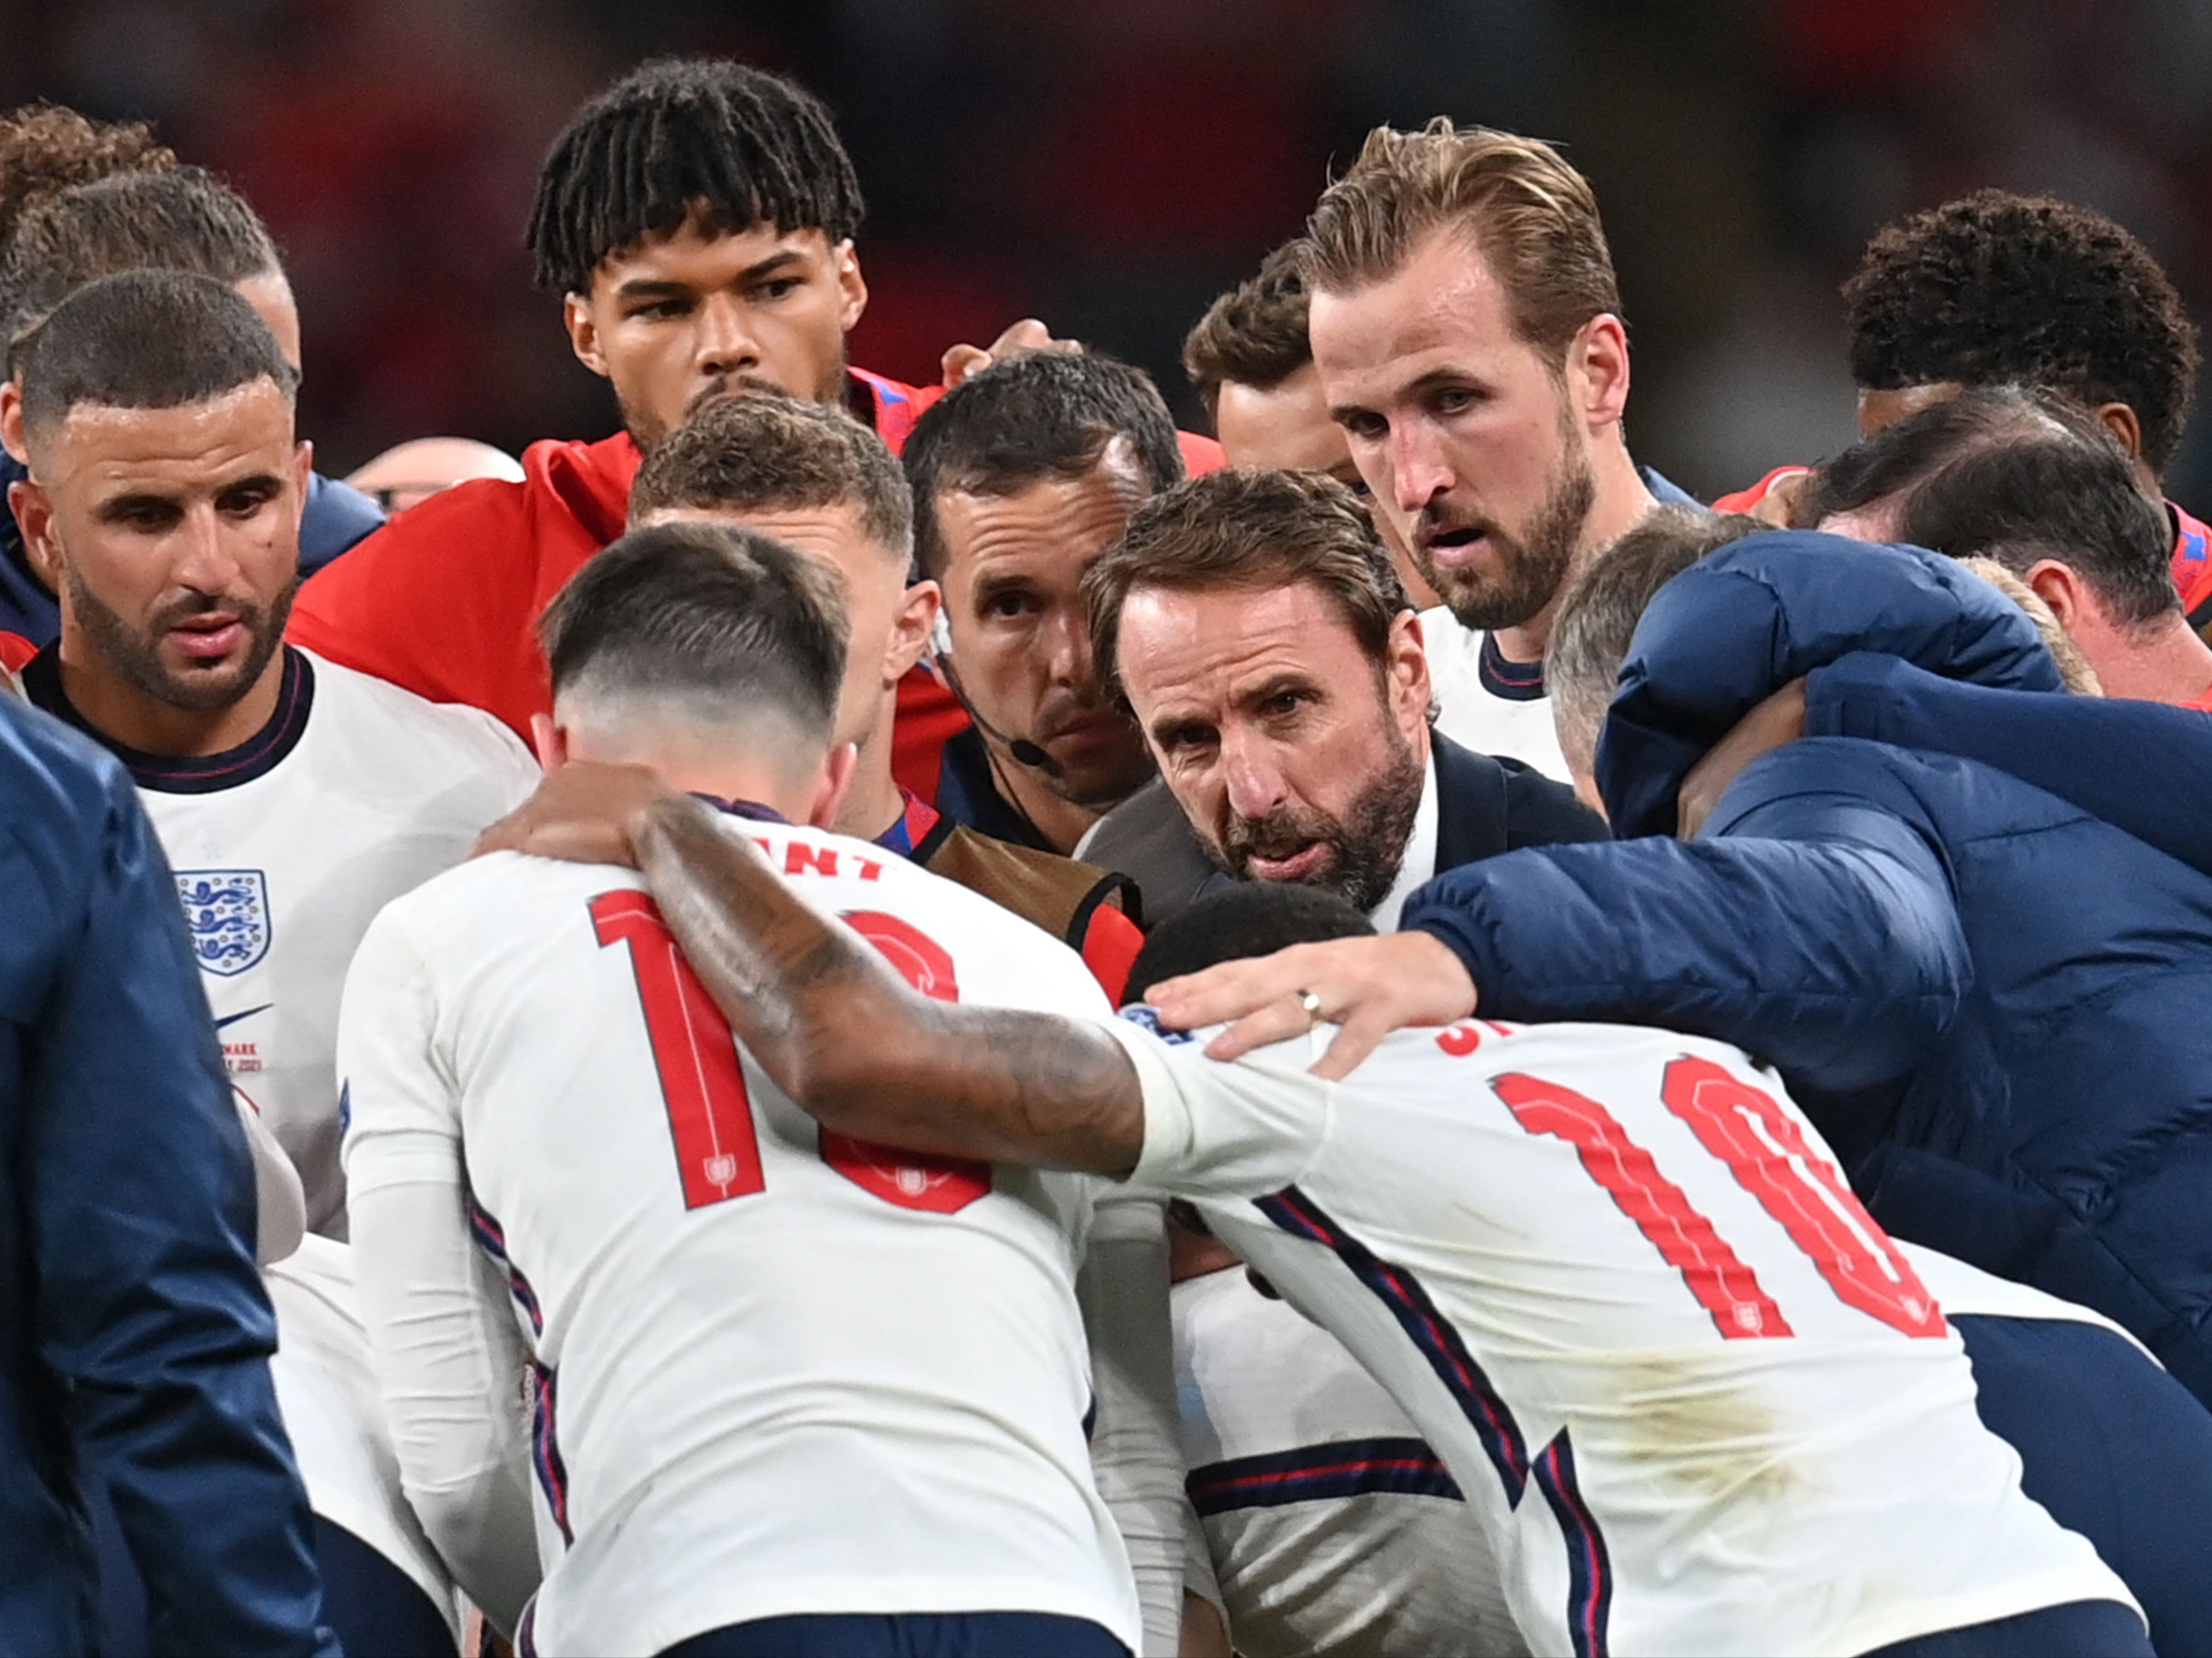 Gareth Southgate has steered England all the way to the final